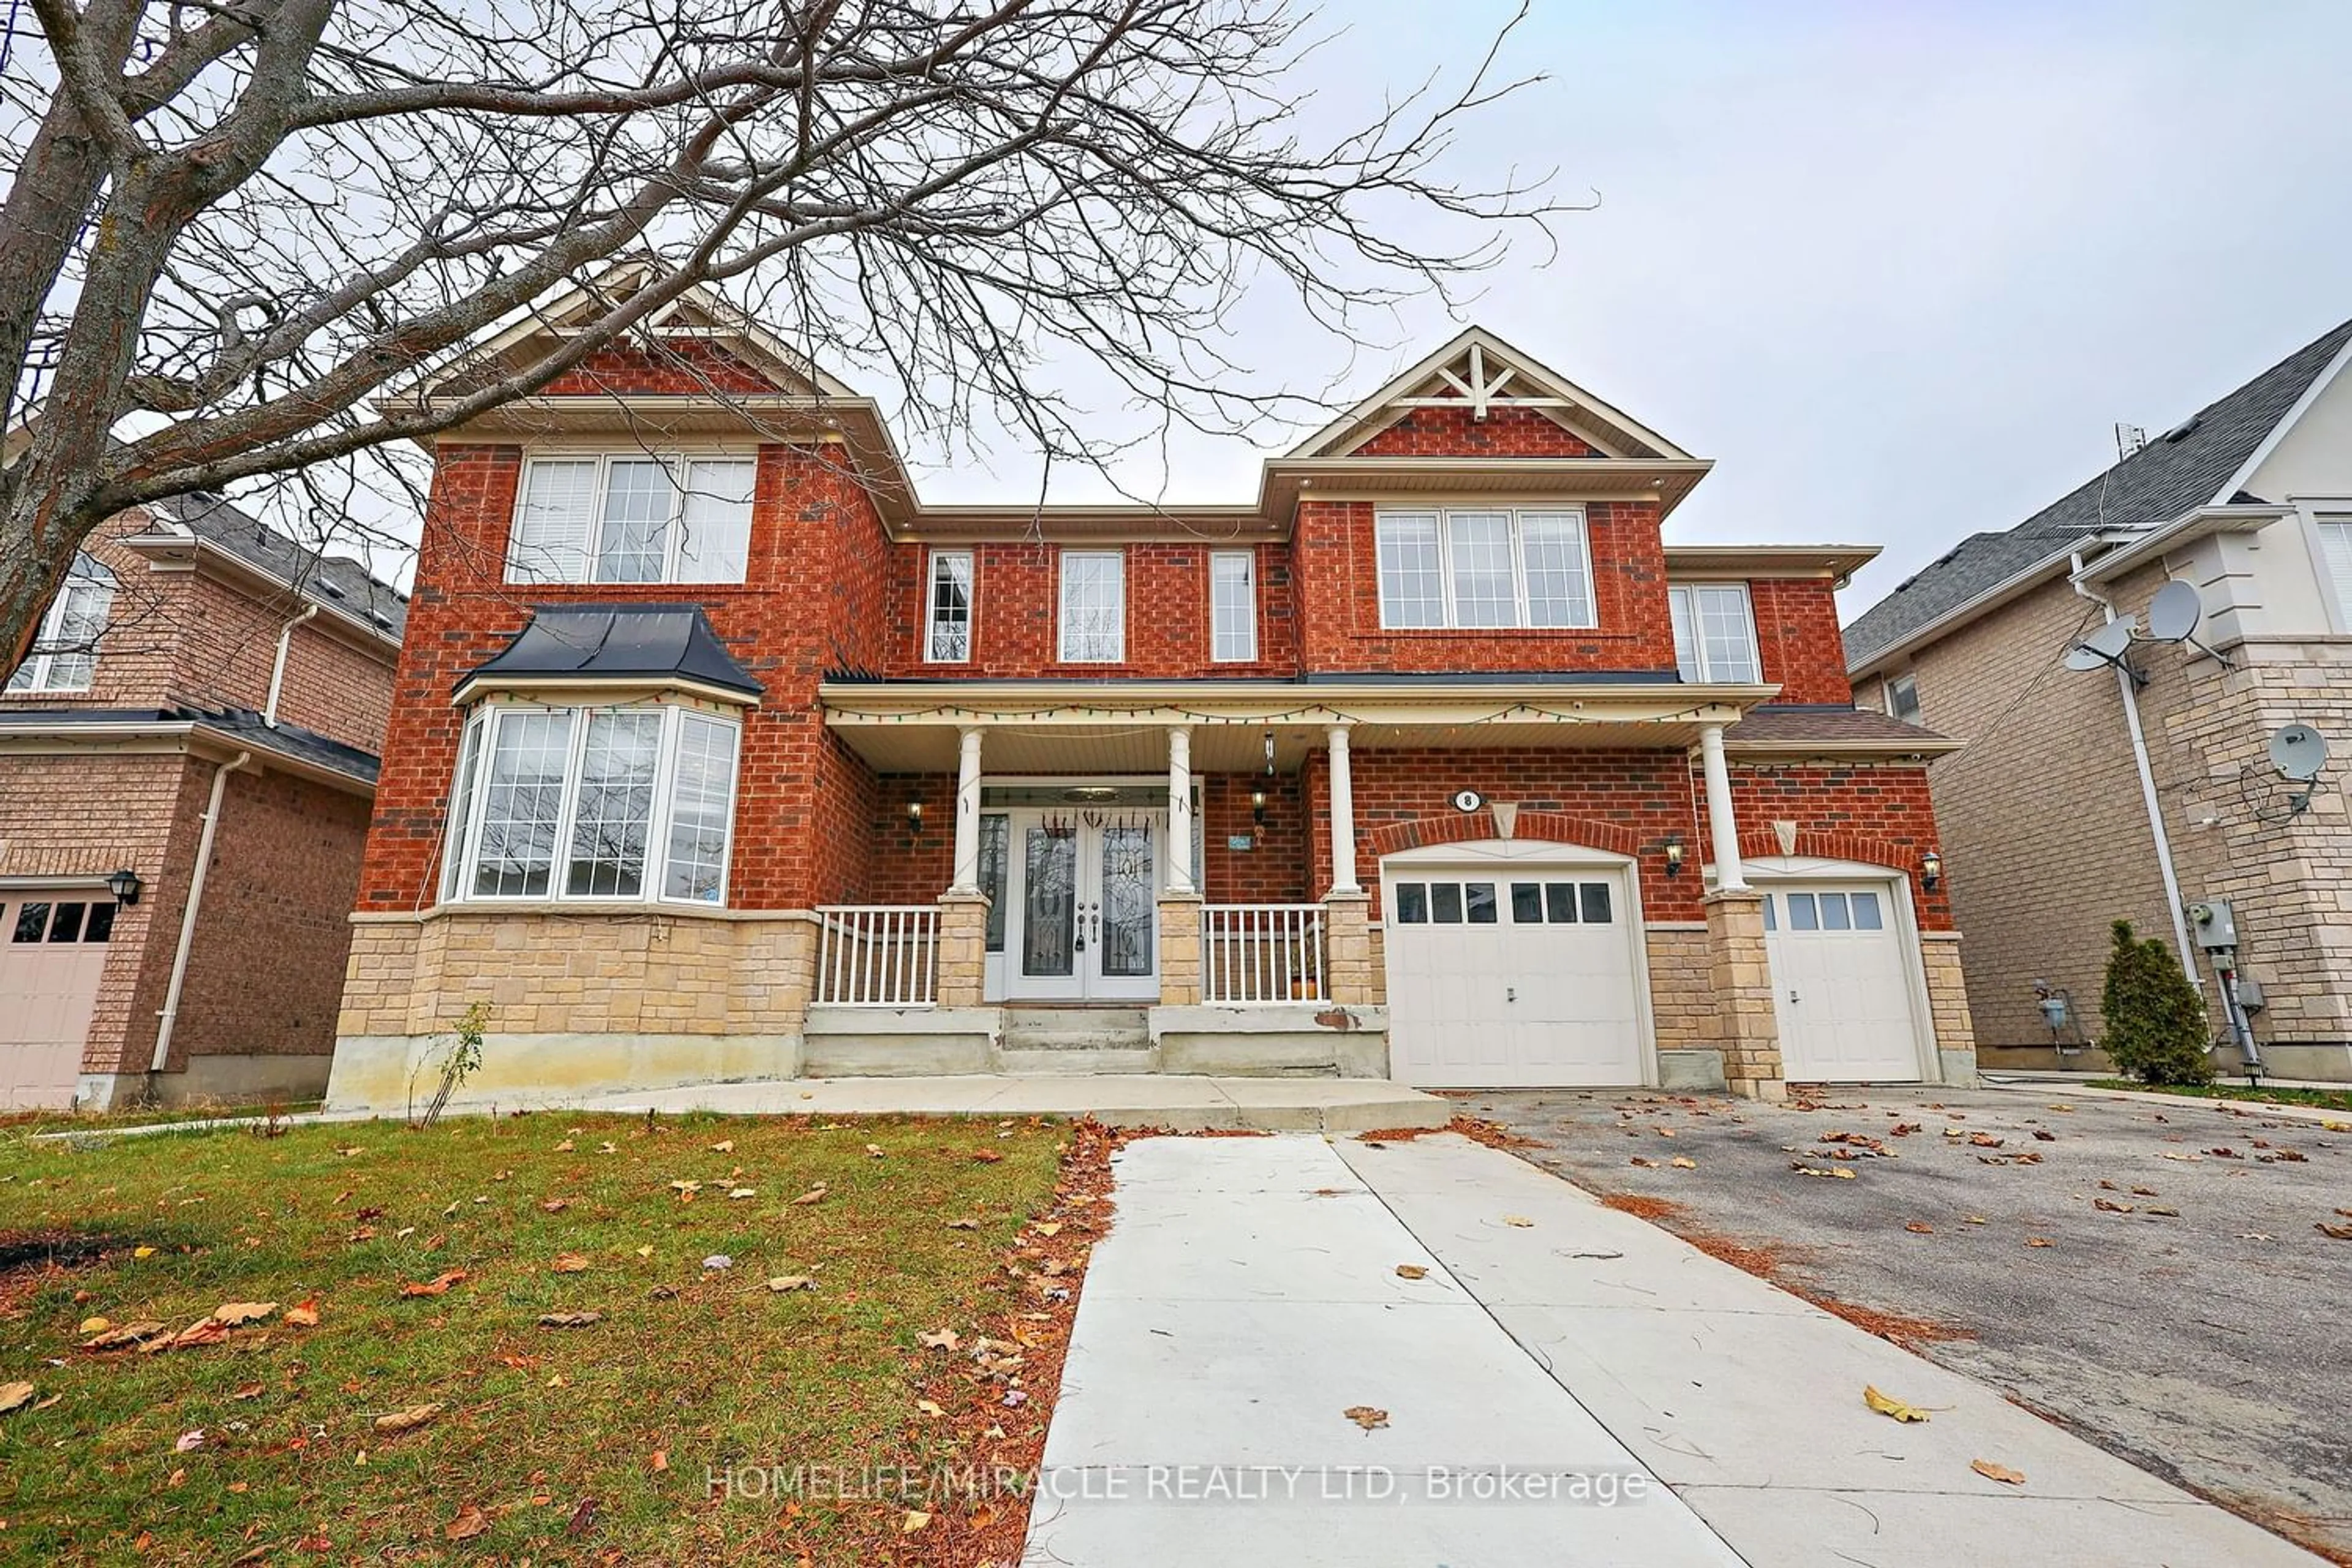 Home with brick exterior material for 8 Nelly Crt, Brampton Ontario L6P 2G5